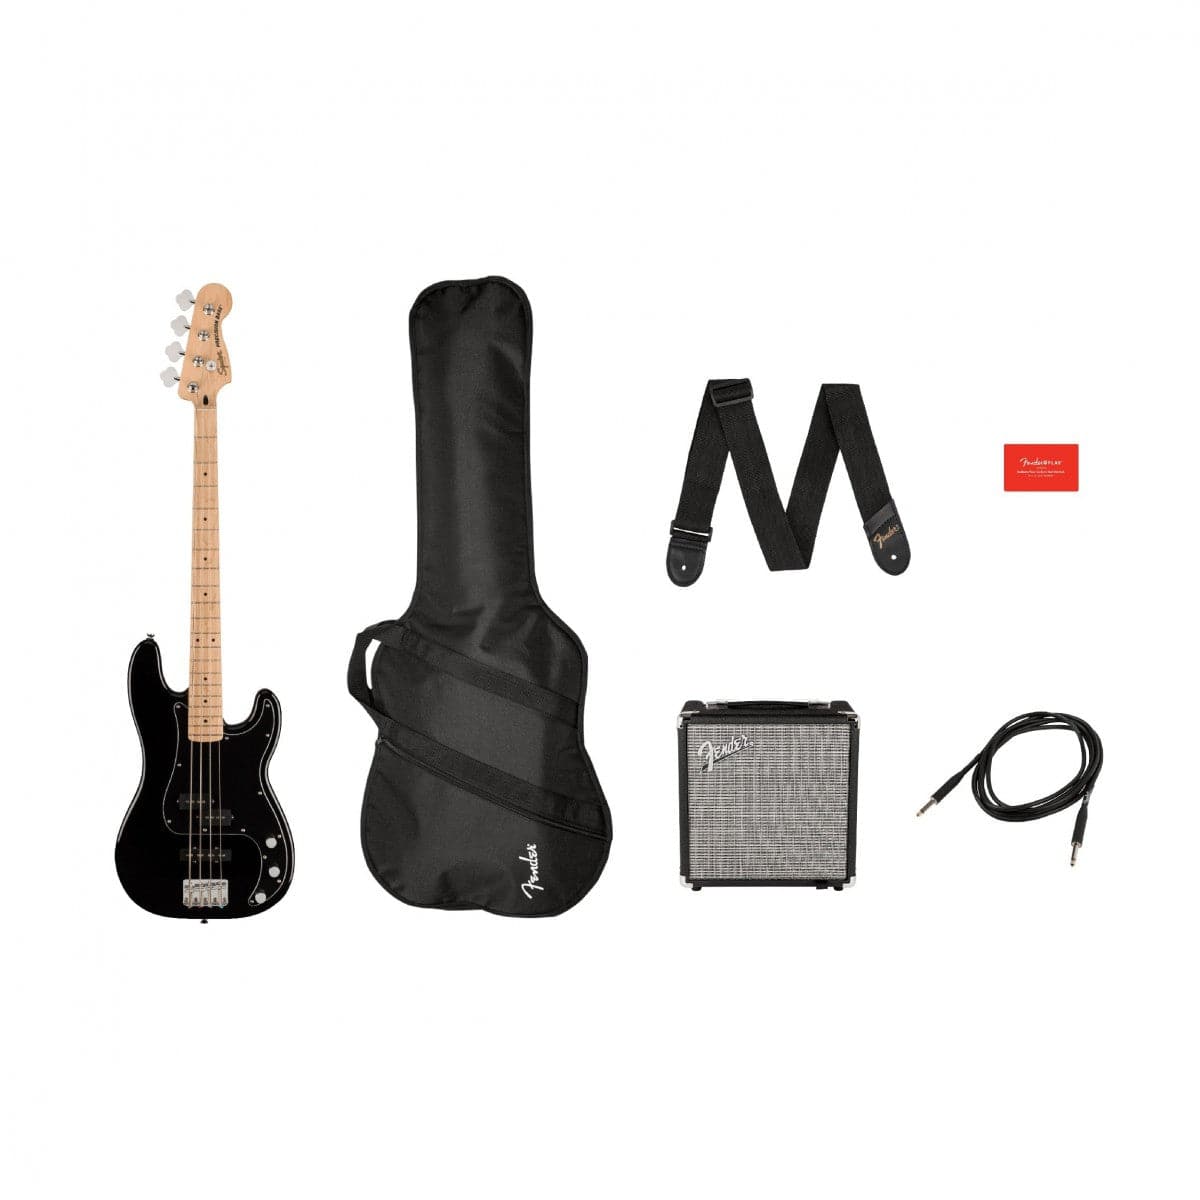 Squier Affinity PJ Bass with Fender Rumble 15 Amplifier Package - Black